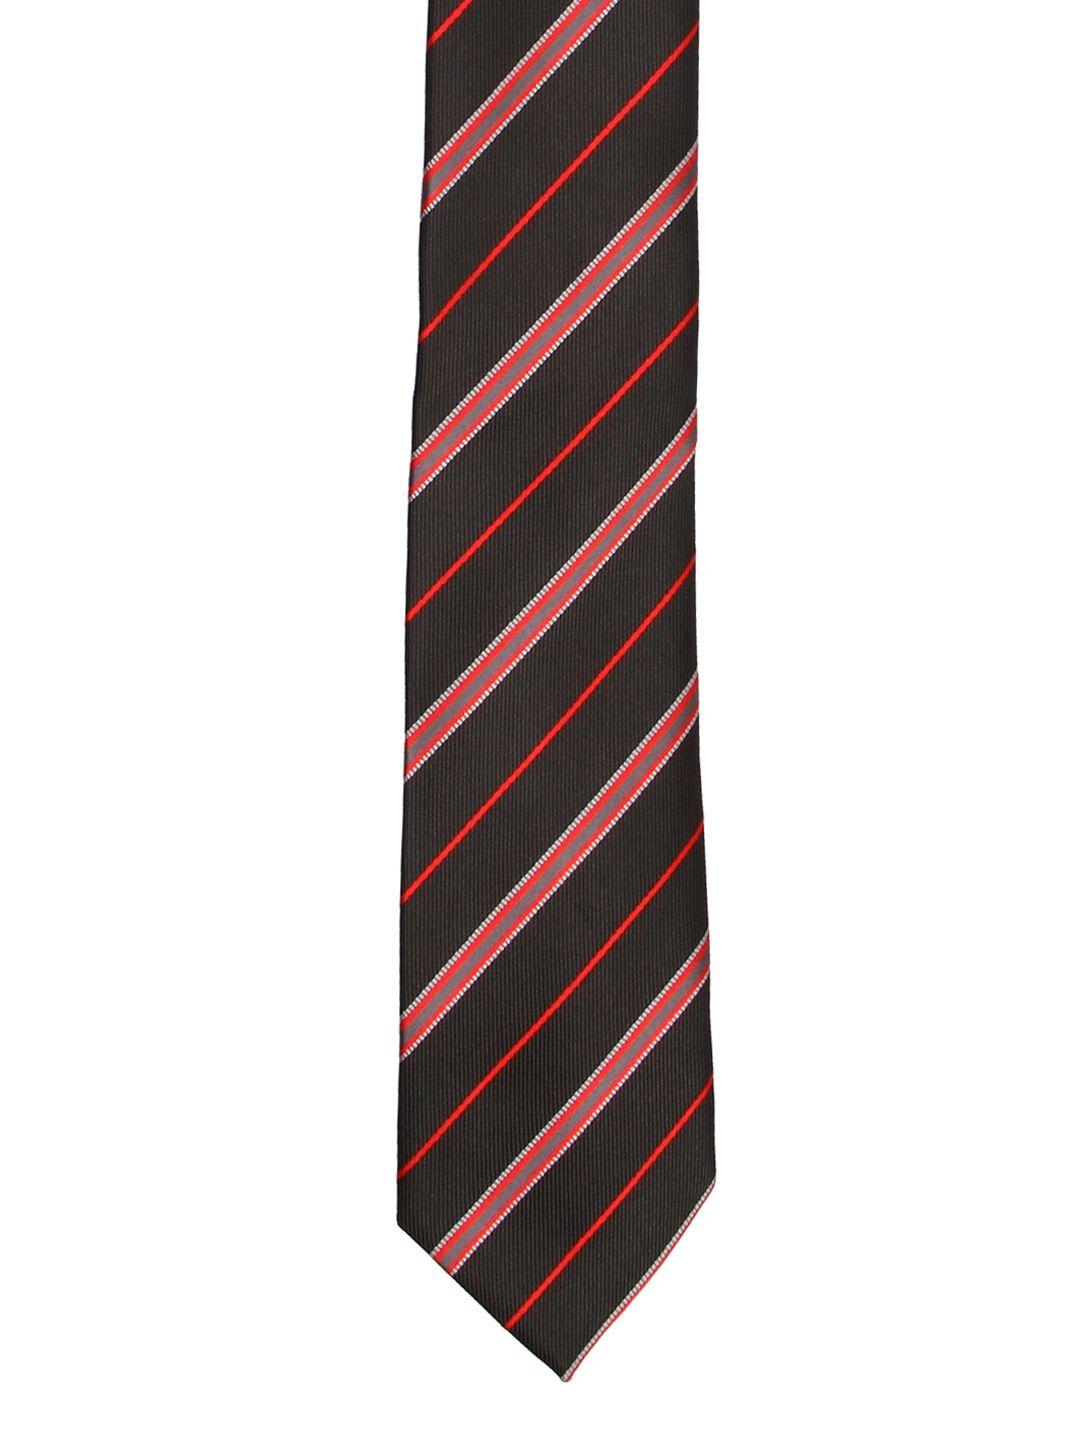 tossido black & red striped broad tie